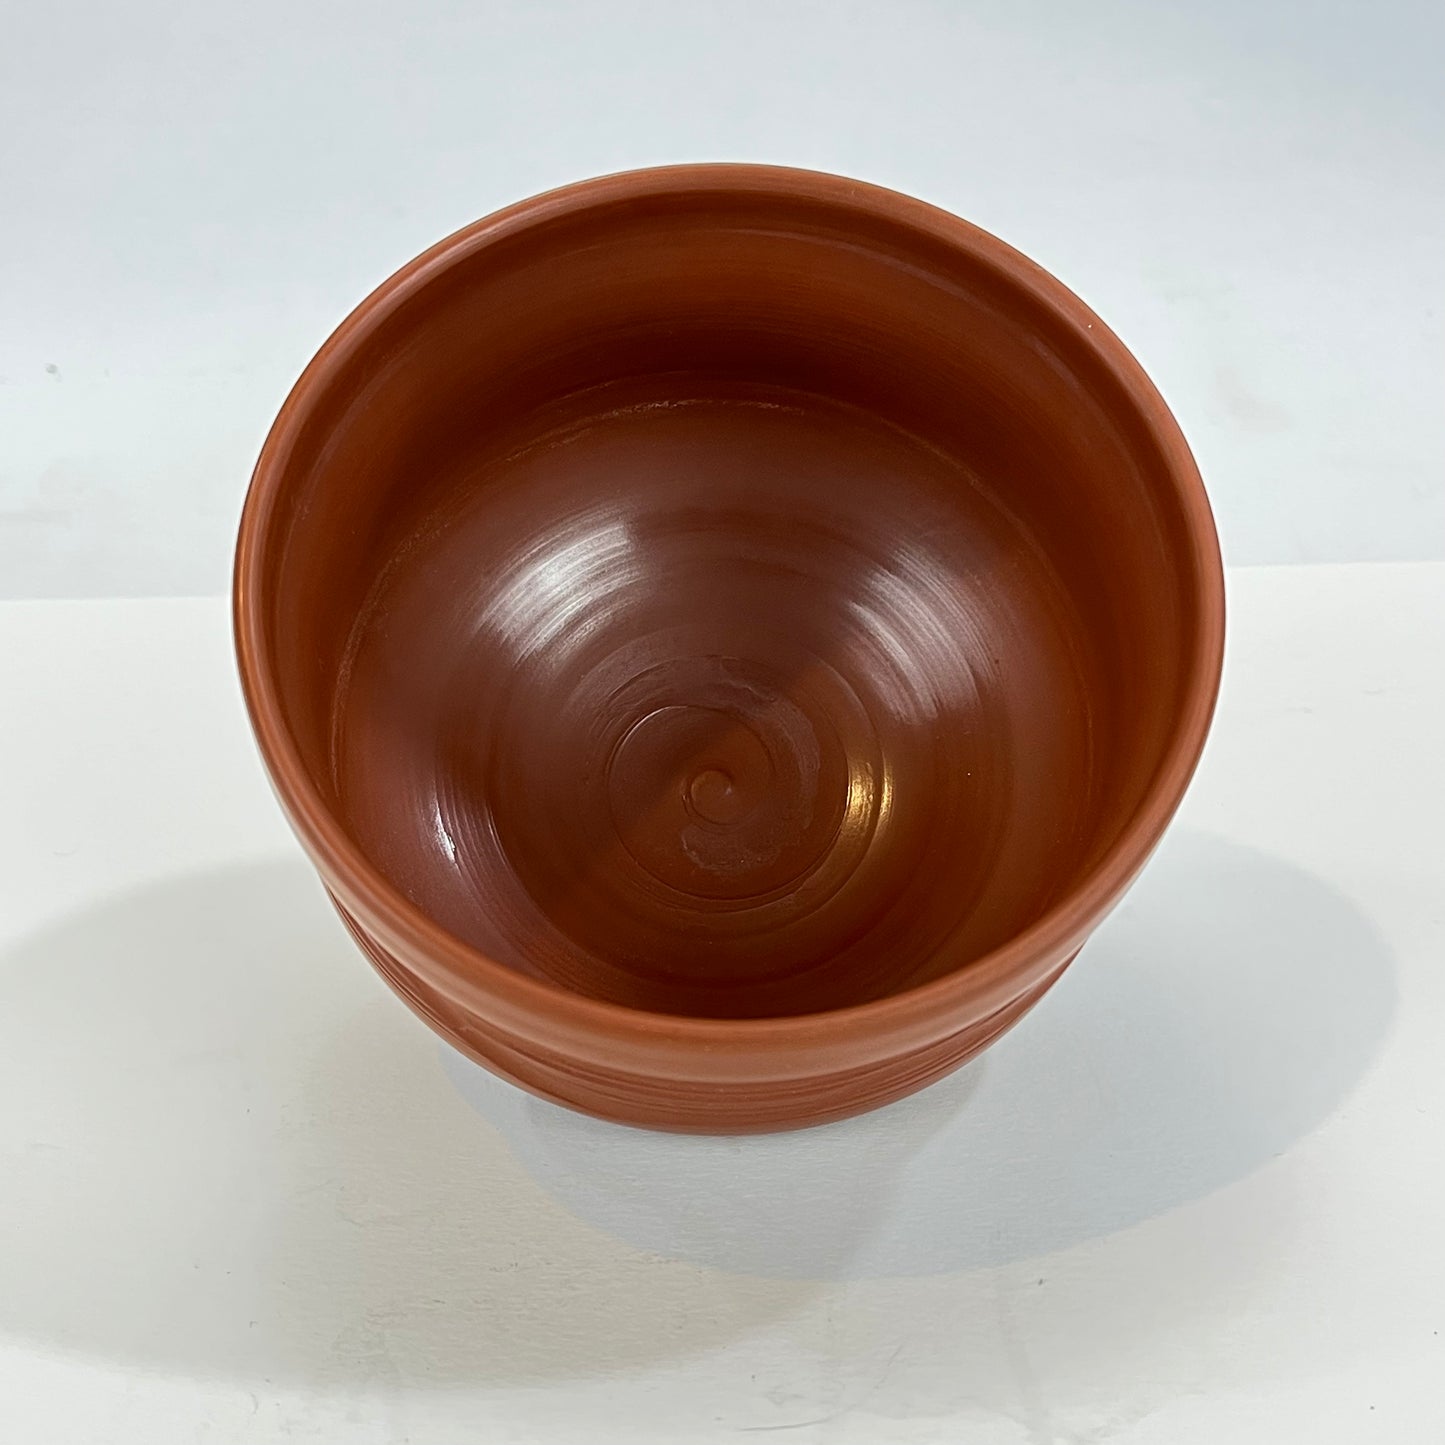 Signed Tea Ceremony Chawan Tea Bowl Red Earthenware Clay Unglazed 4.5”D